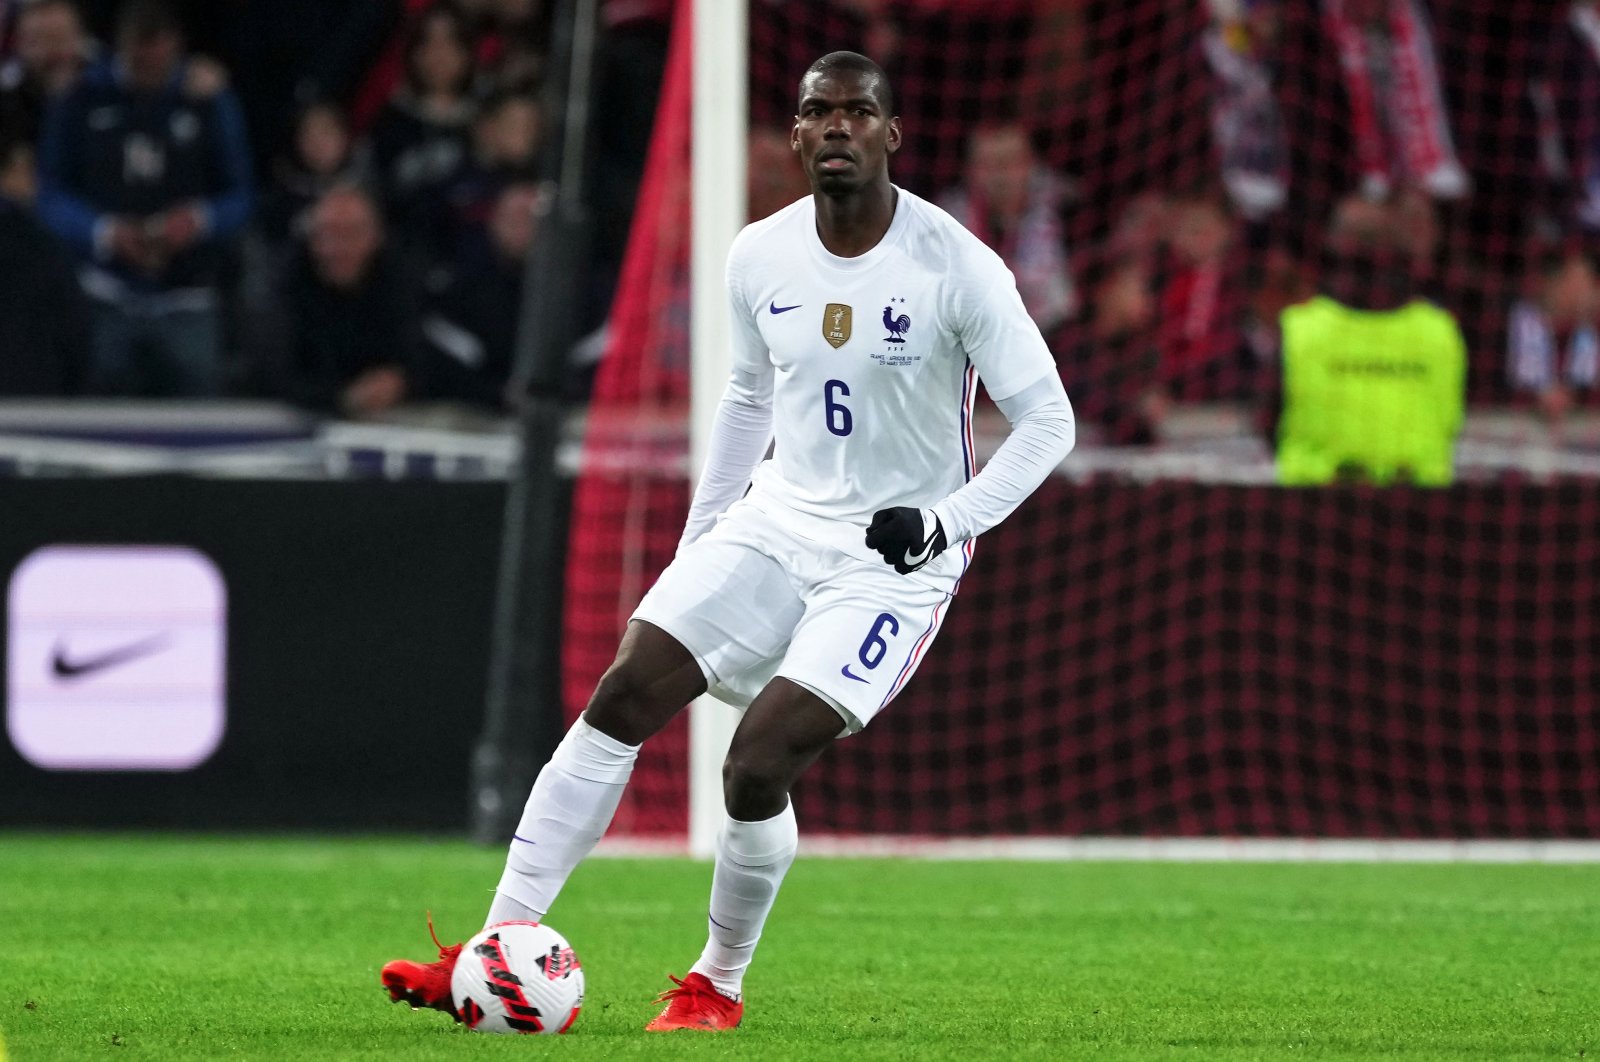 Paul Pogba of France in action during the International friendly match between France and South Africa. Lille, France, March 29, 2022. (Getty Images Photo)